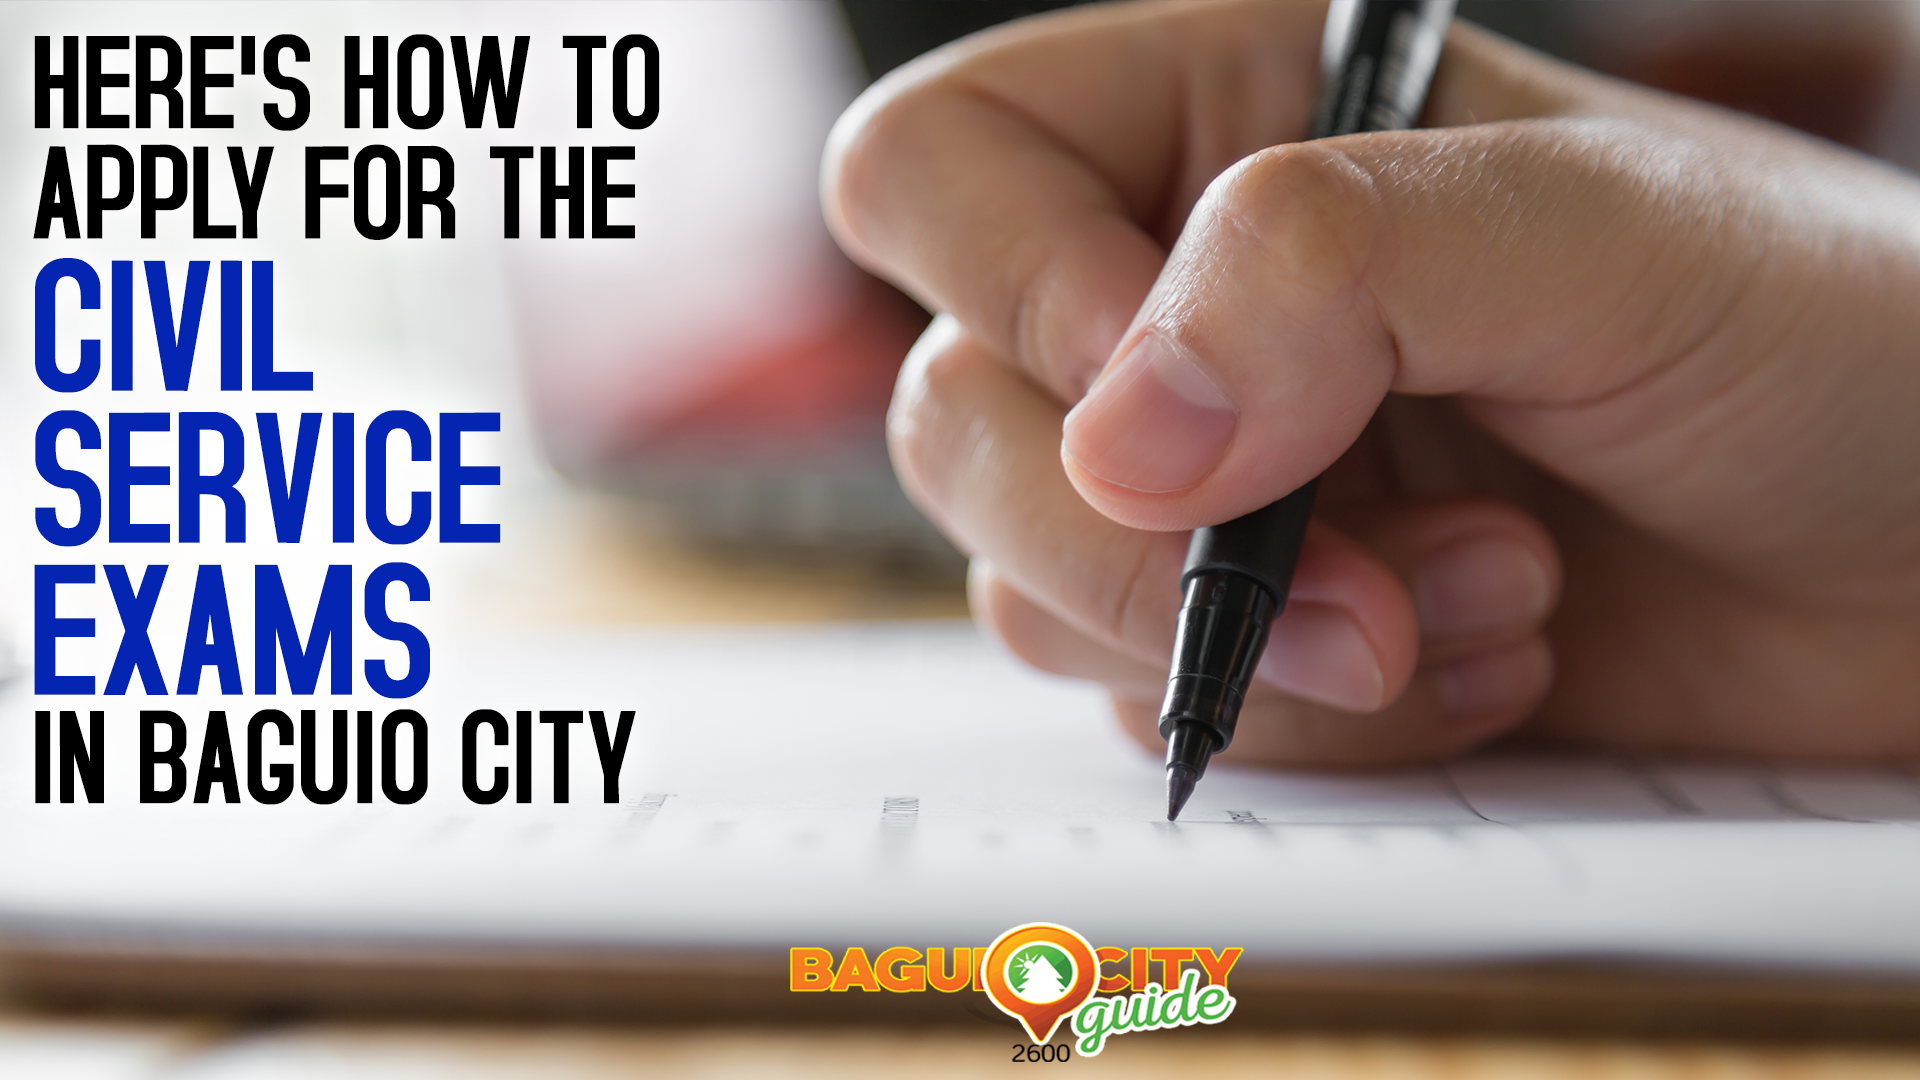 Here's how to apply for the Civil Service Exams in Baguio City BCG